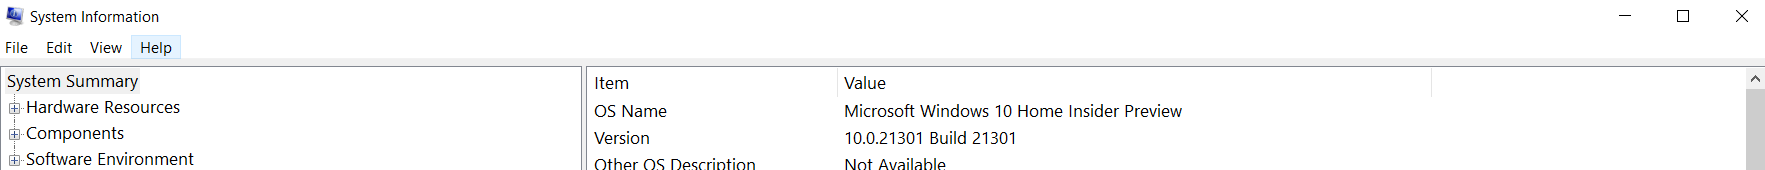 How do I exit from Windows Insider Program and get back to the normal Windows 10? 31dbcae2-59b4-4beb-b292-78106cfc2ee2?upload=true.png